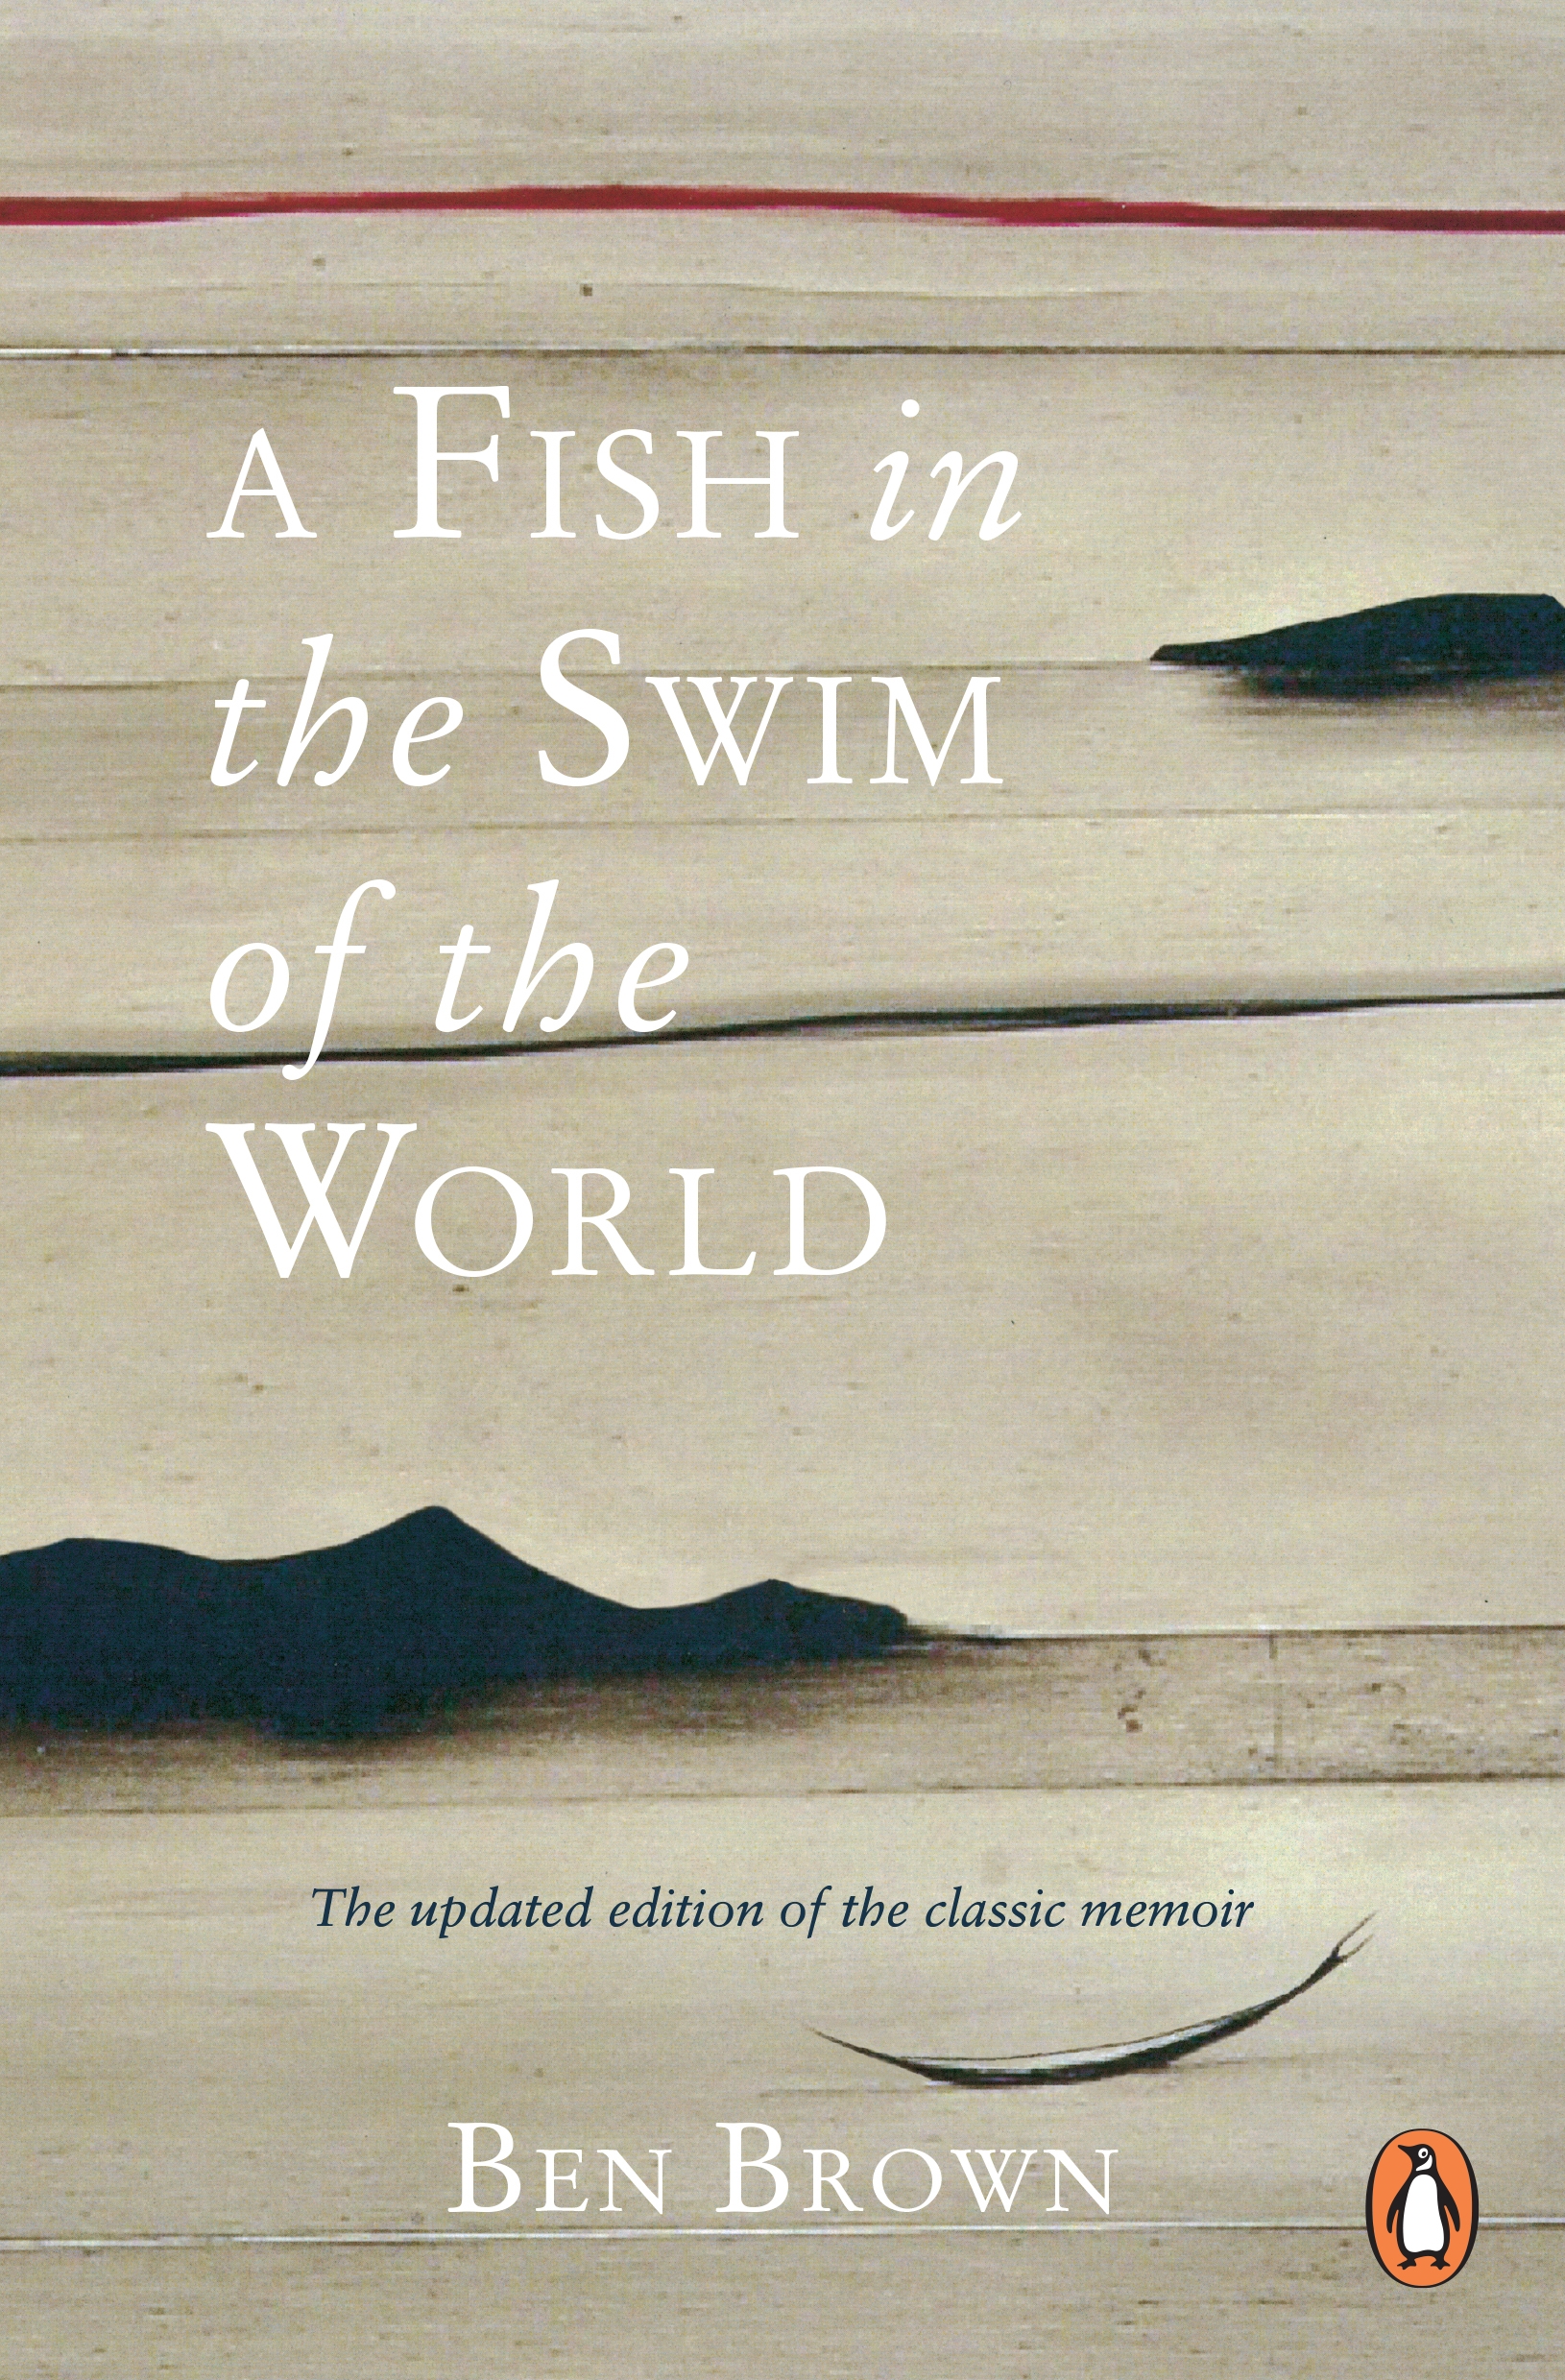 A Fish In the Swim of the World by Ben Brown - Penguin Books New Zealand